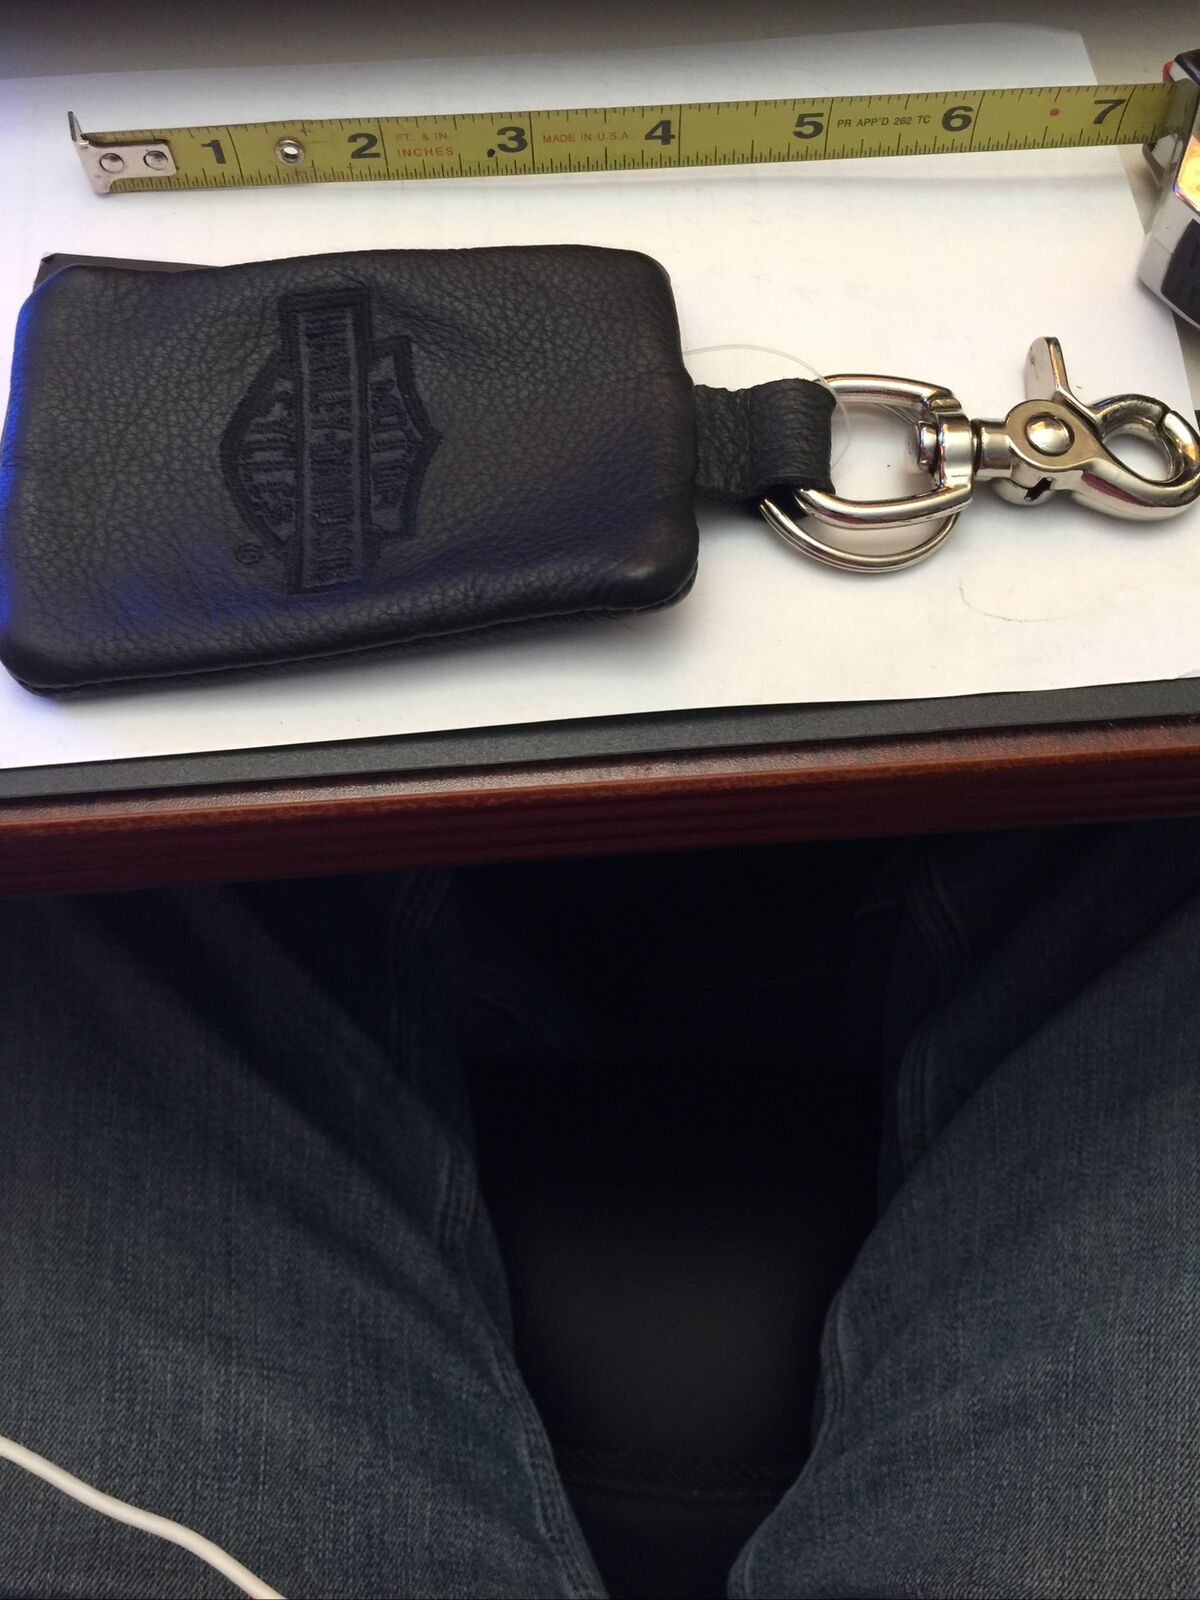 harley davidson leather key chain With Pouch